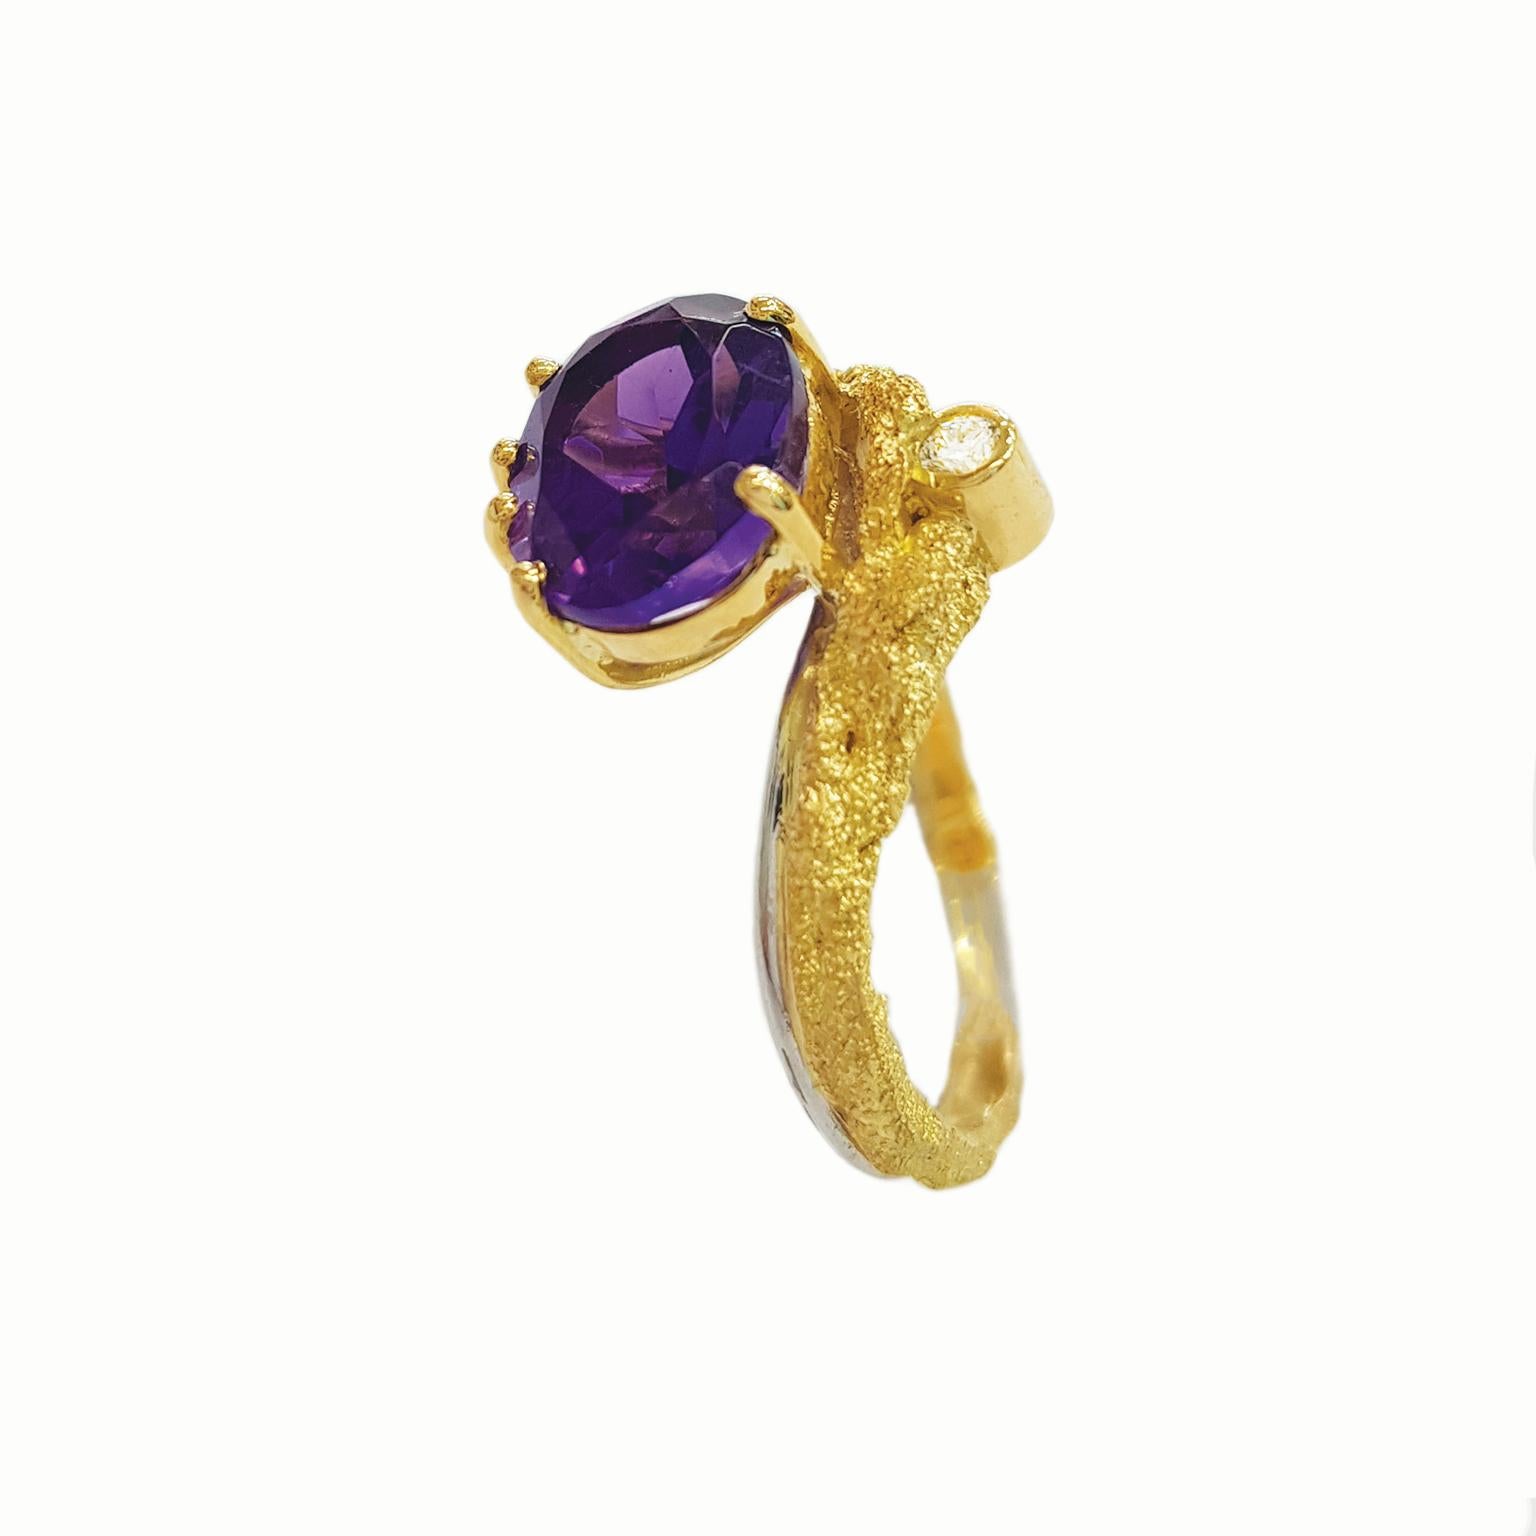 Artist Paul Amey 18K Gold, Platinum, Amethyst and Diamond Ring For Sale